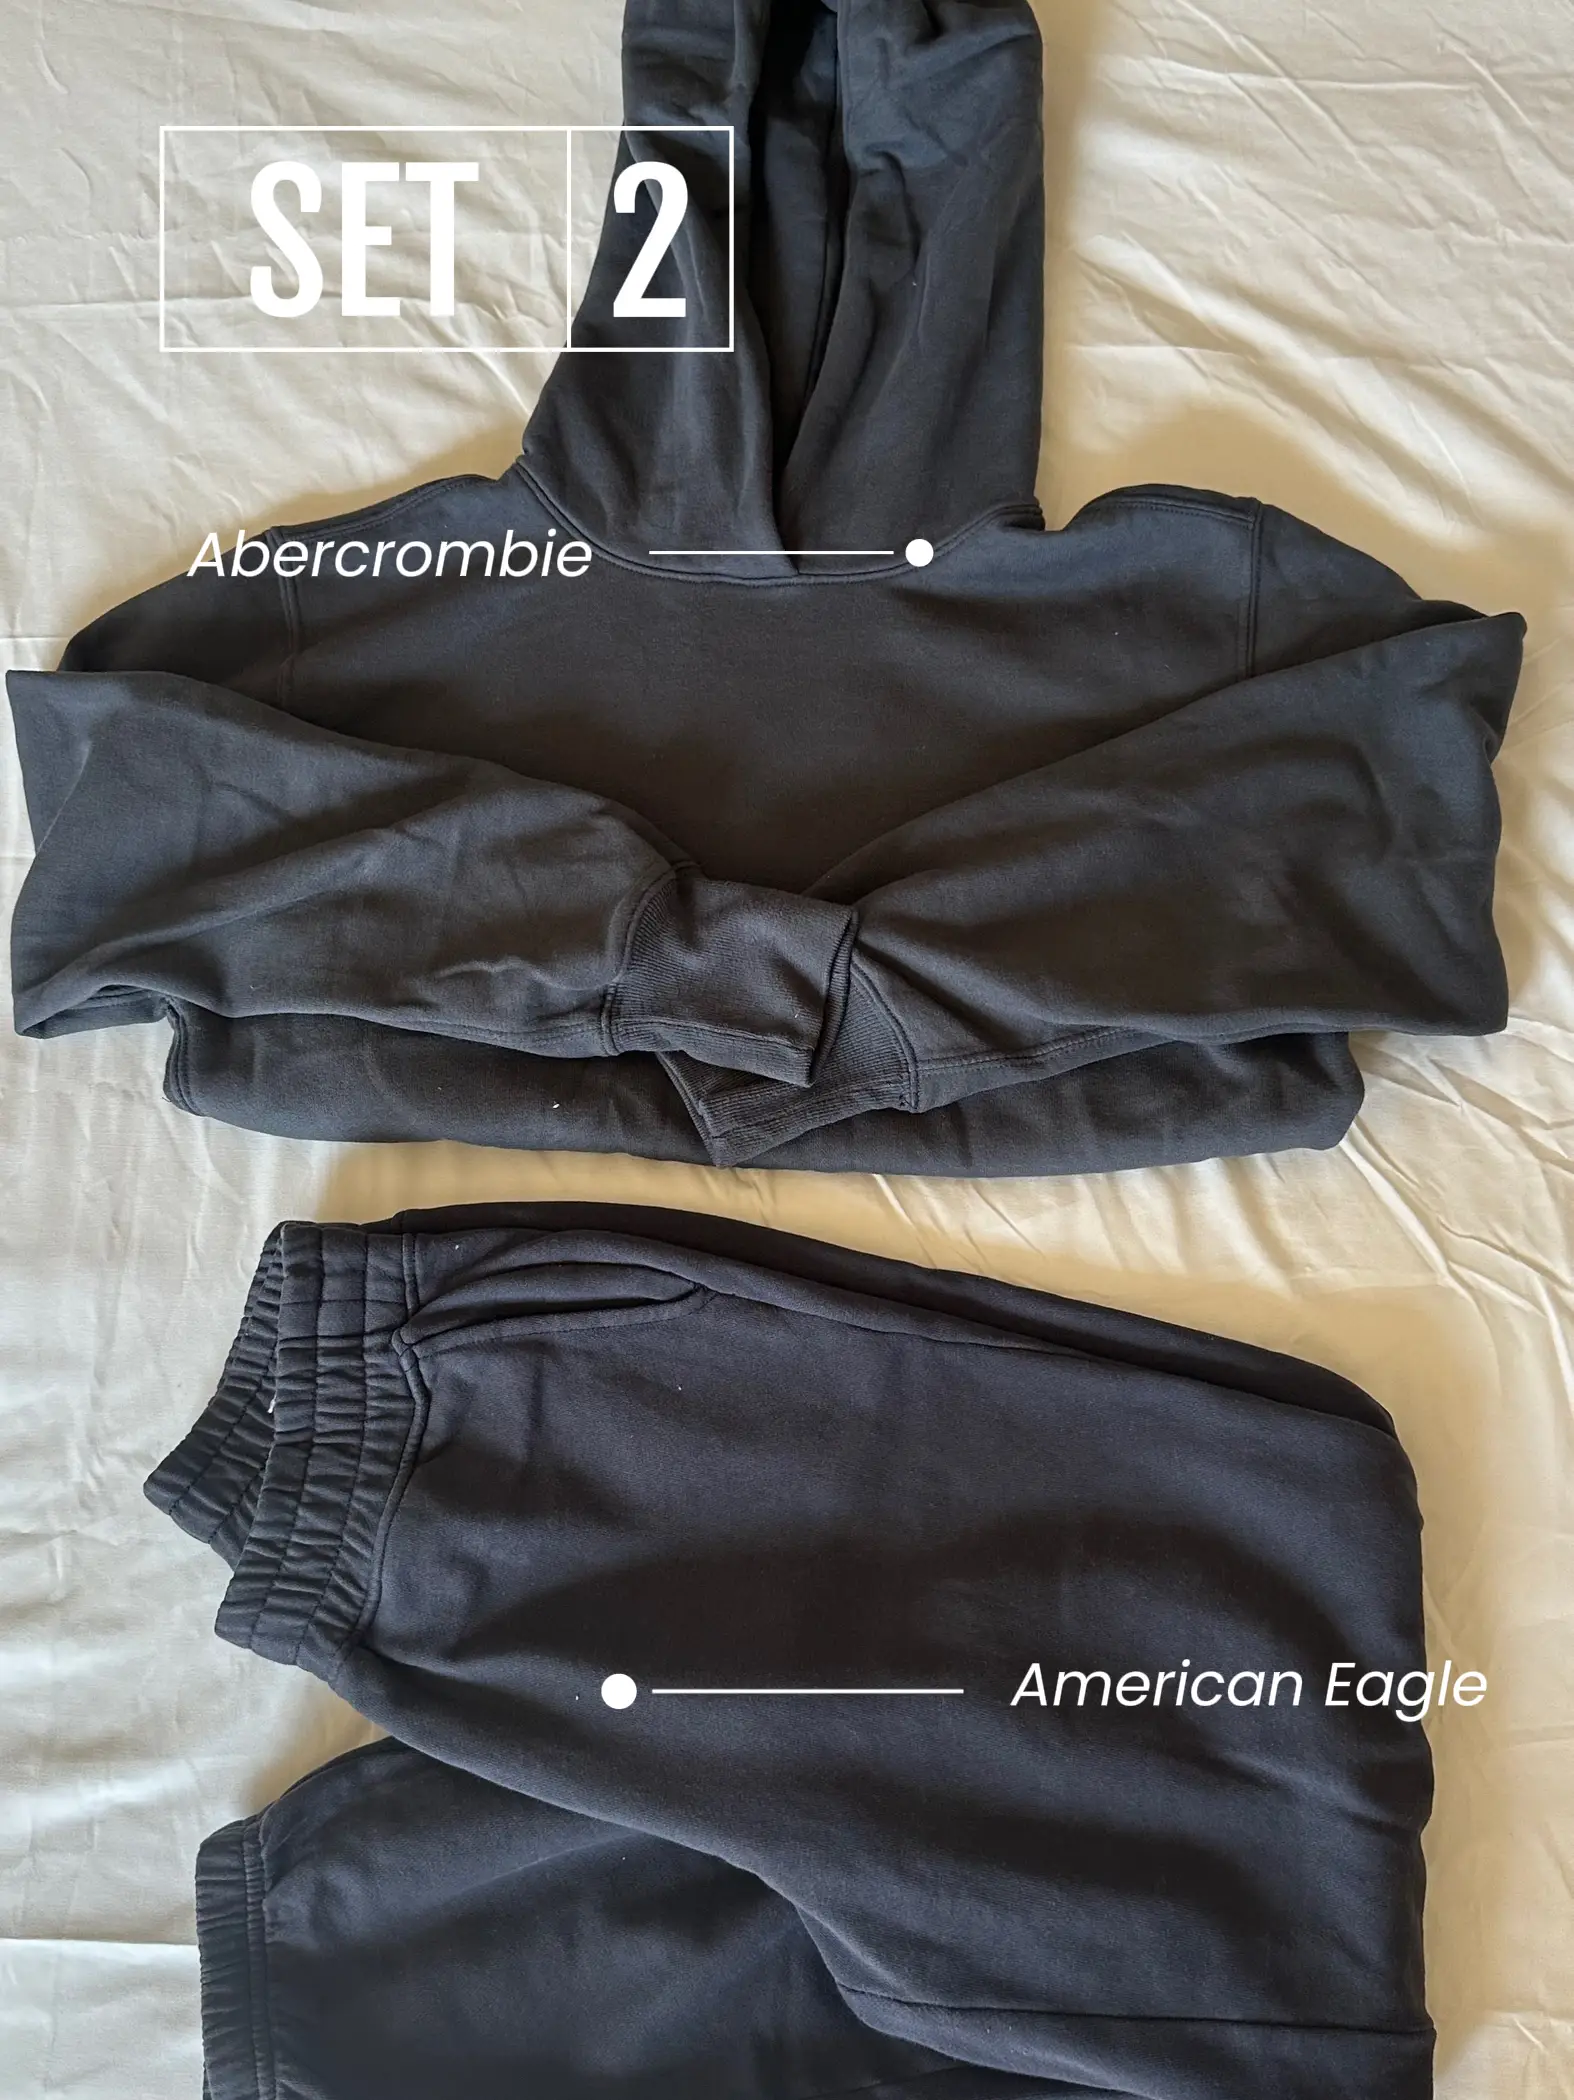 Abercrombie & Fitch Spring Jeans Review - Taryn Newton